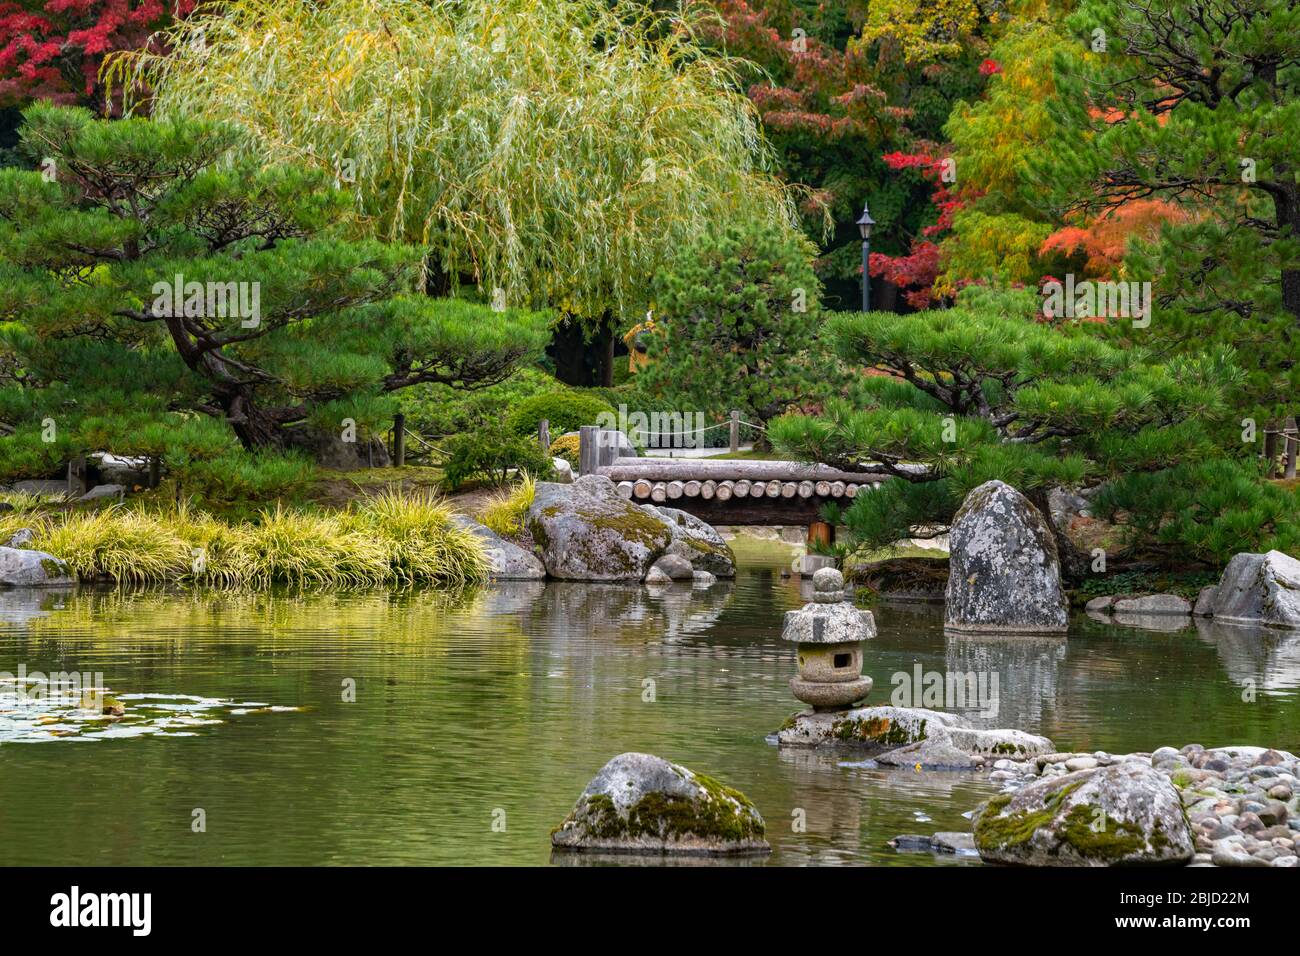 Japanese Garden with Wooden Foot Bridge, Pond, & Fall Foliage Stock Photo